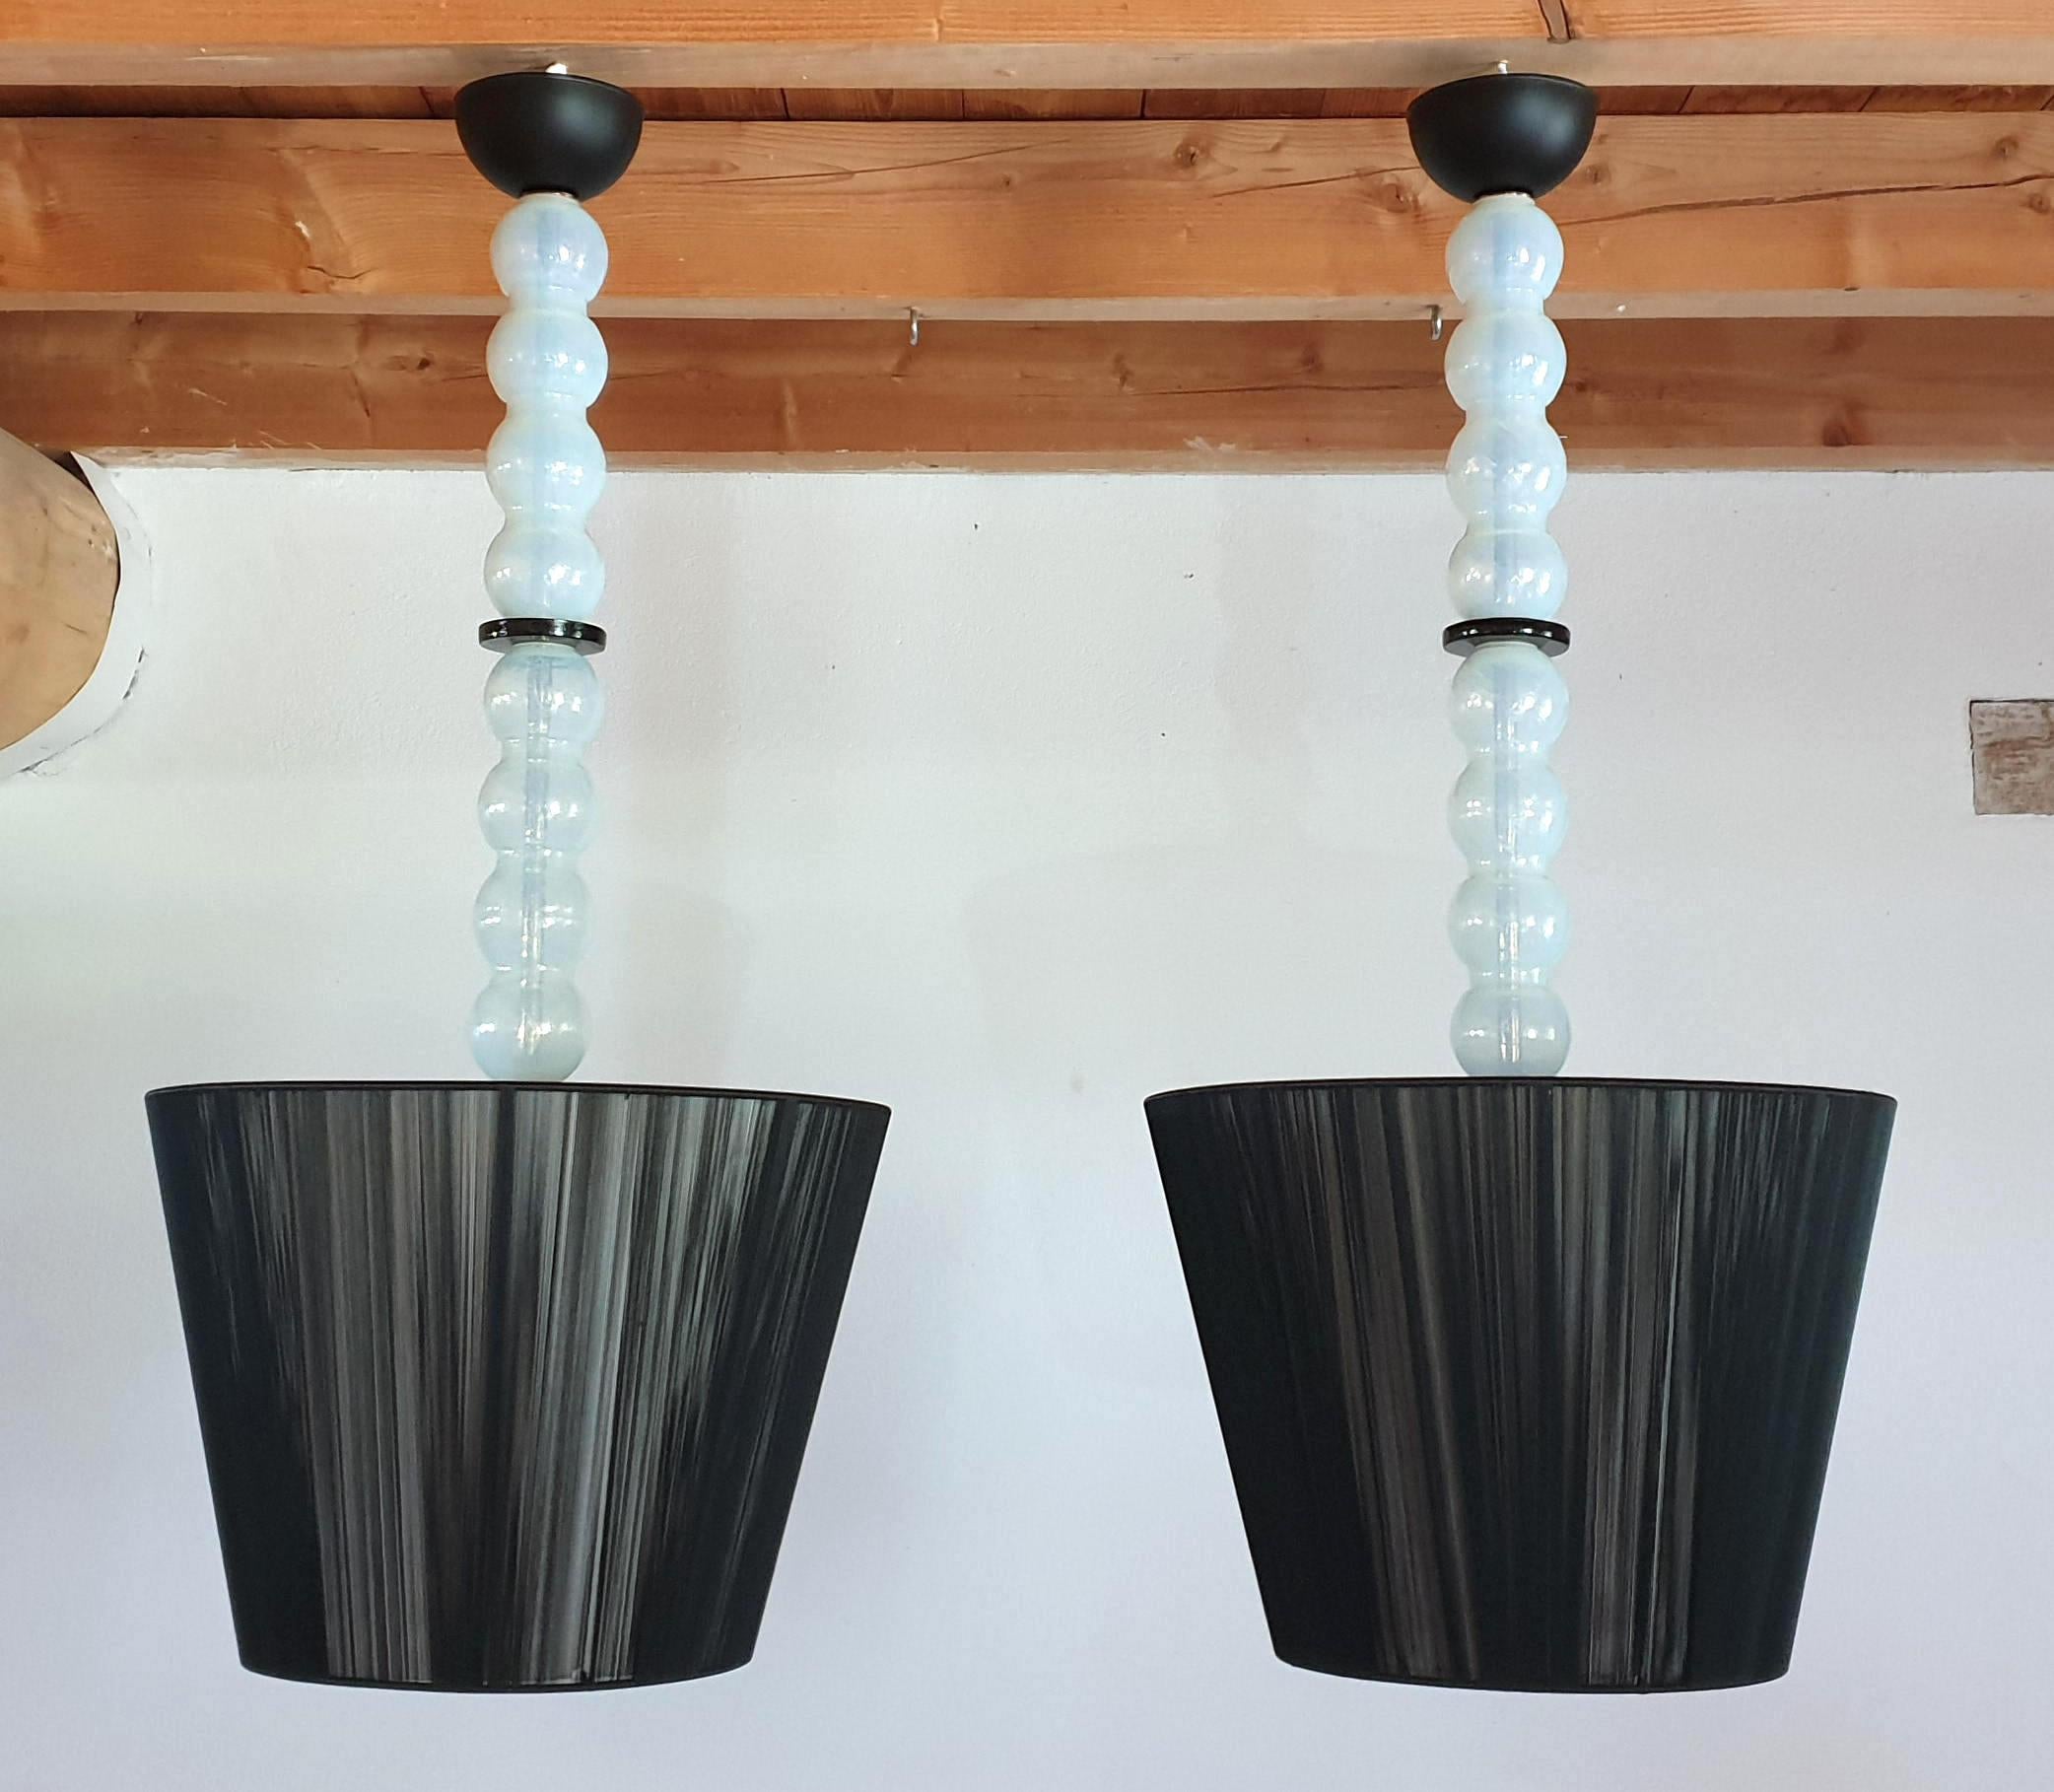 Pair of large Mid-Century Modern pendant light chandeliers, made of Murano opalescent glass, with black glass rings and new black fabric shades, with white interior. The opalescent glass has blue or green colors; but also amber hues when